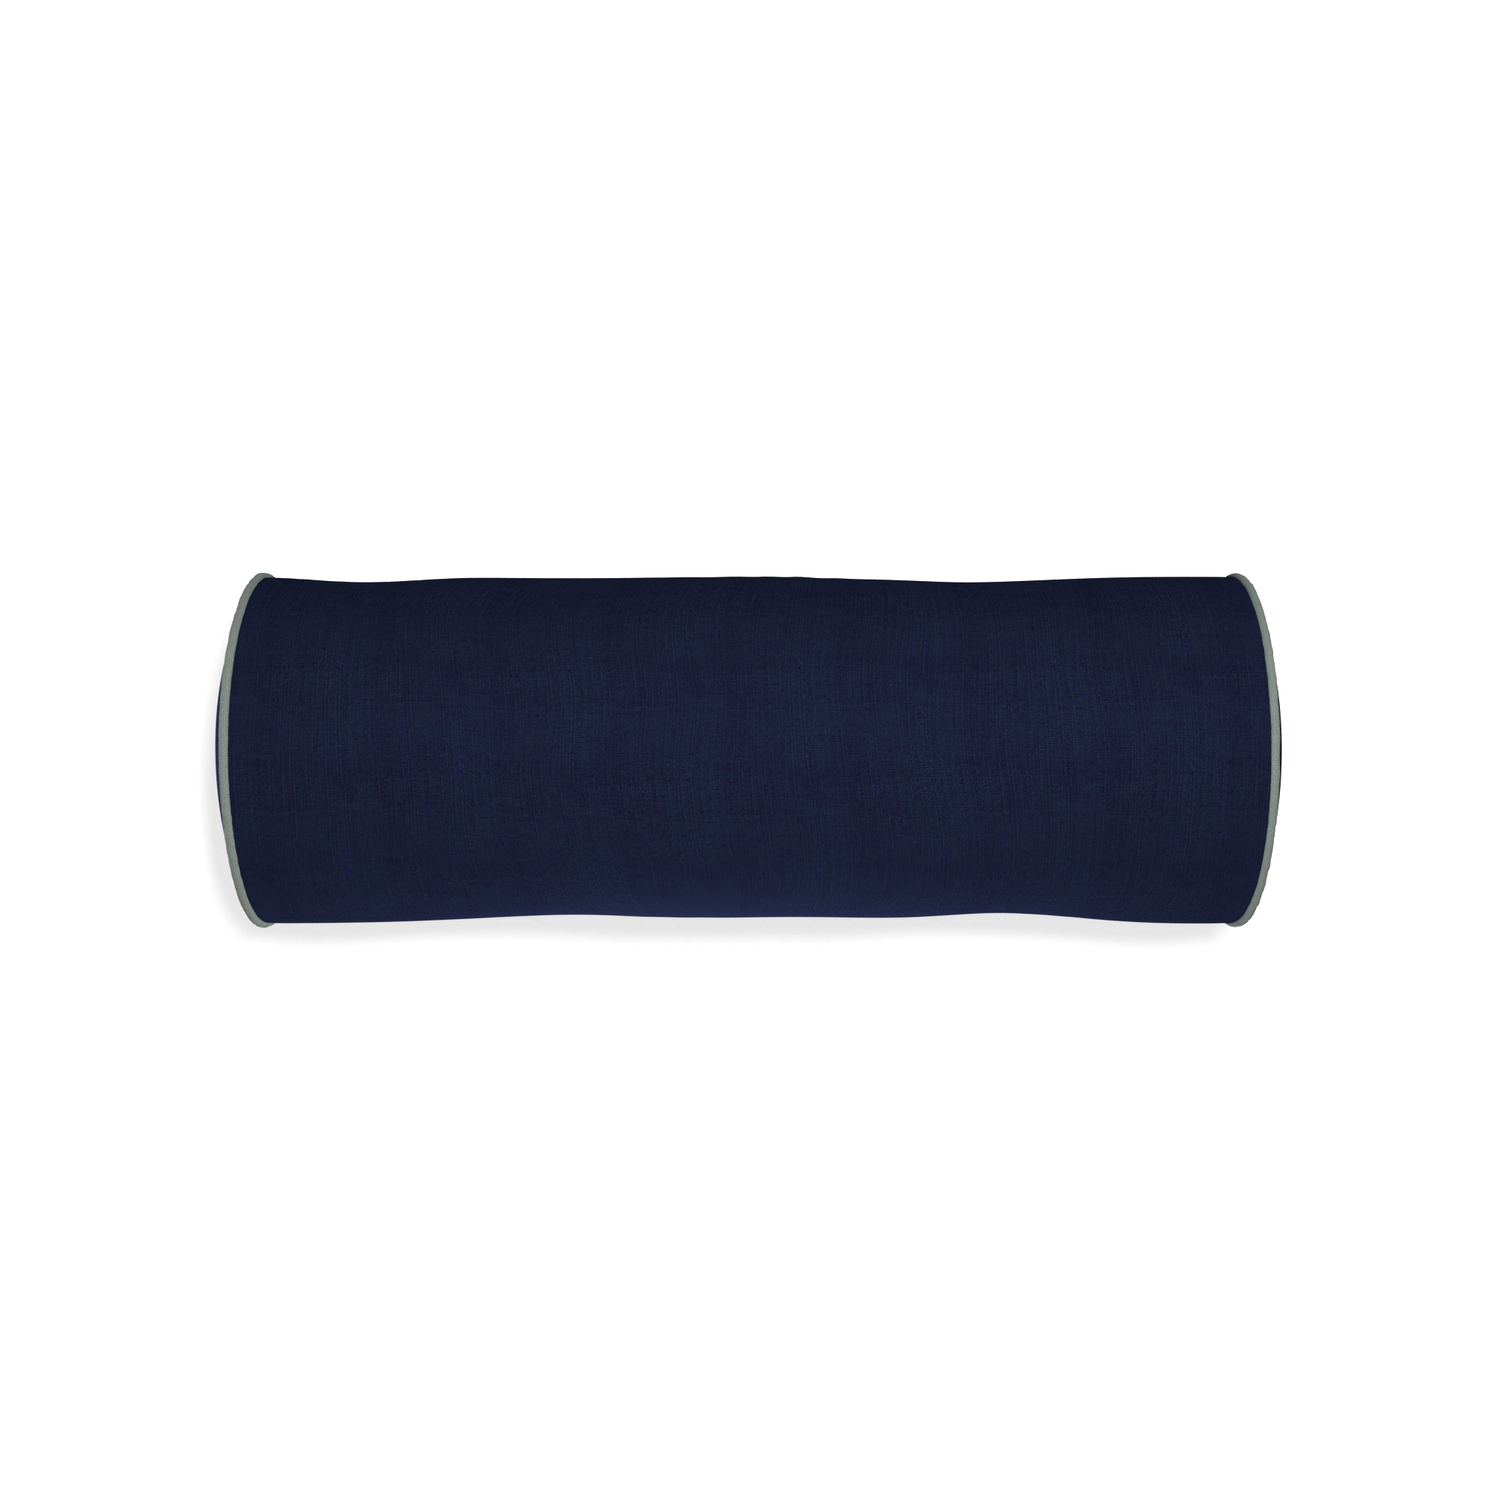 Bolster midnight custom navy bluepillow with sage piping on white background